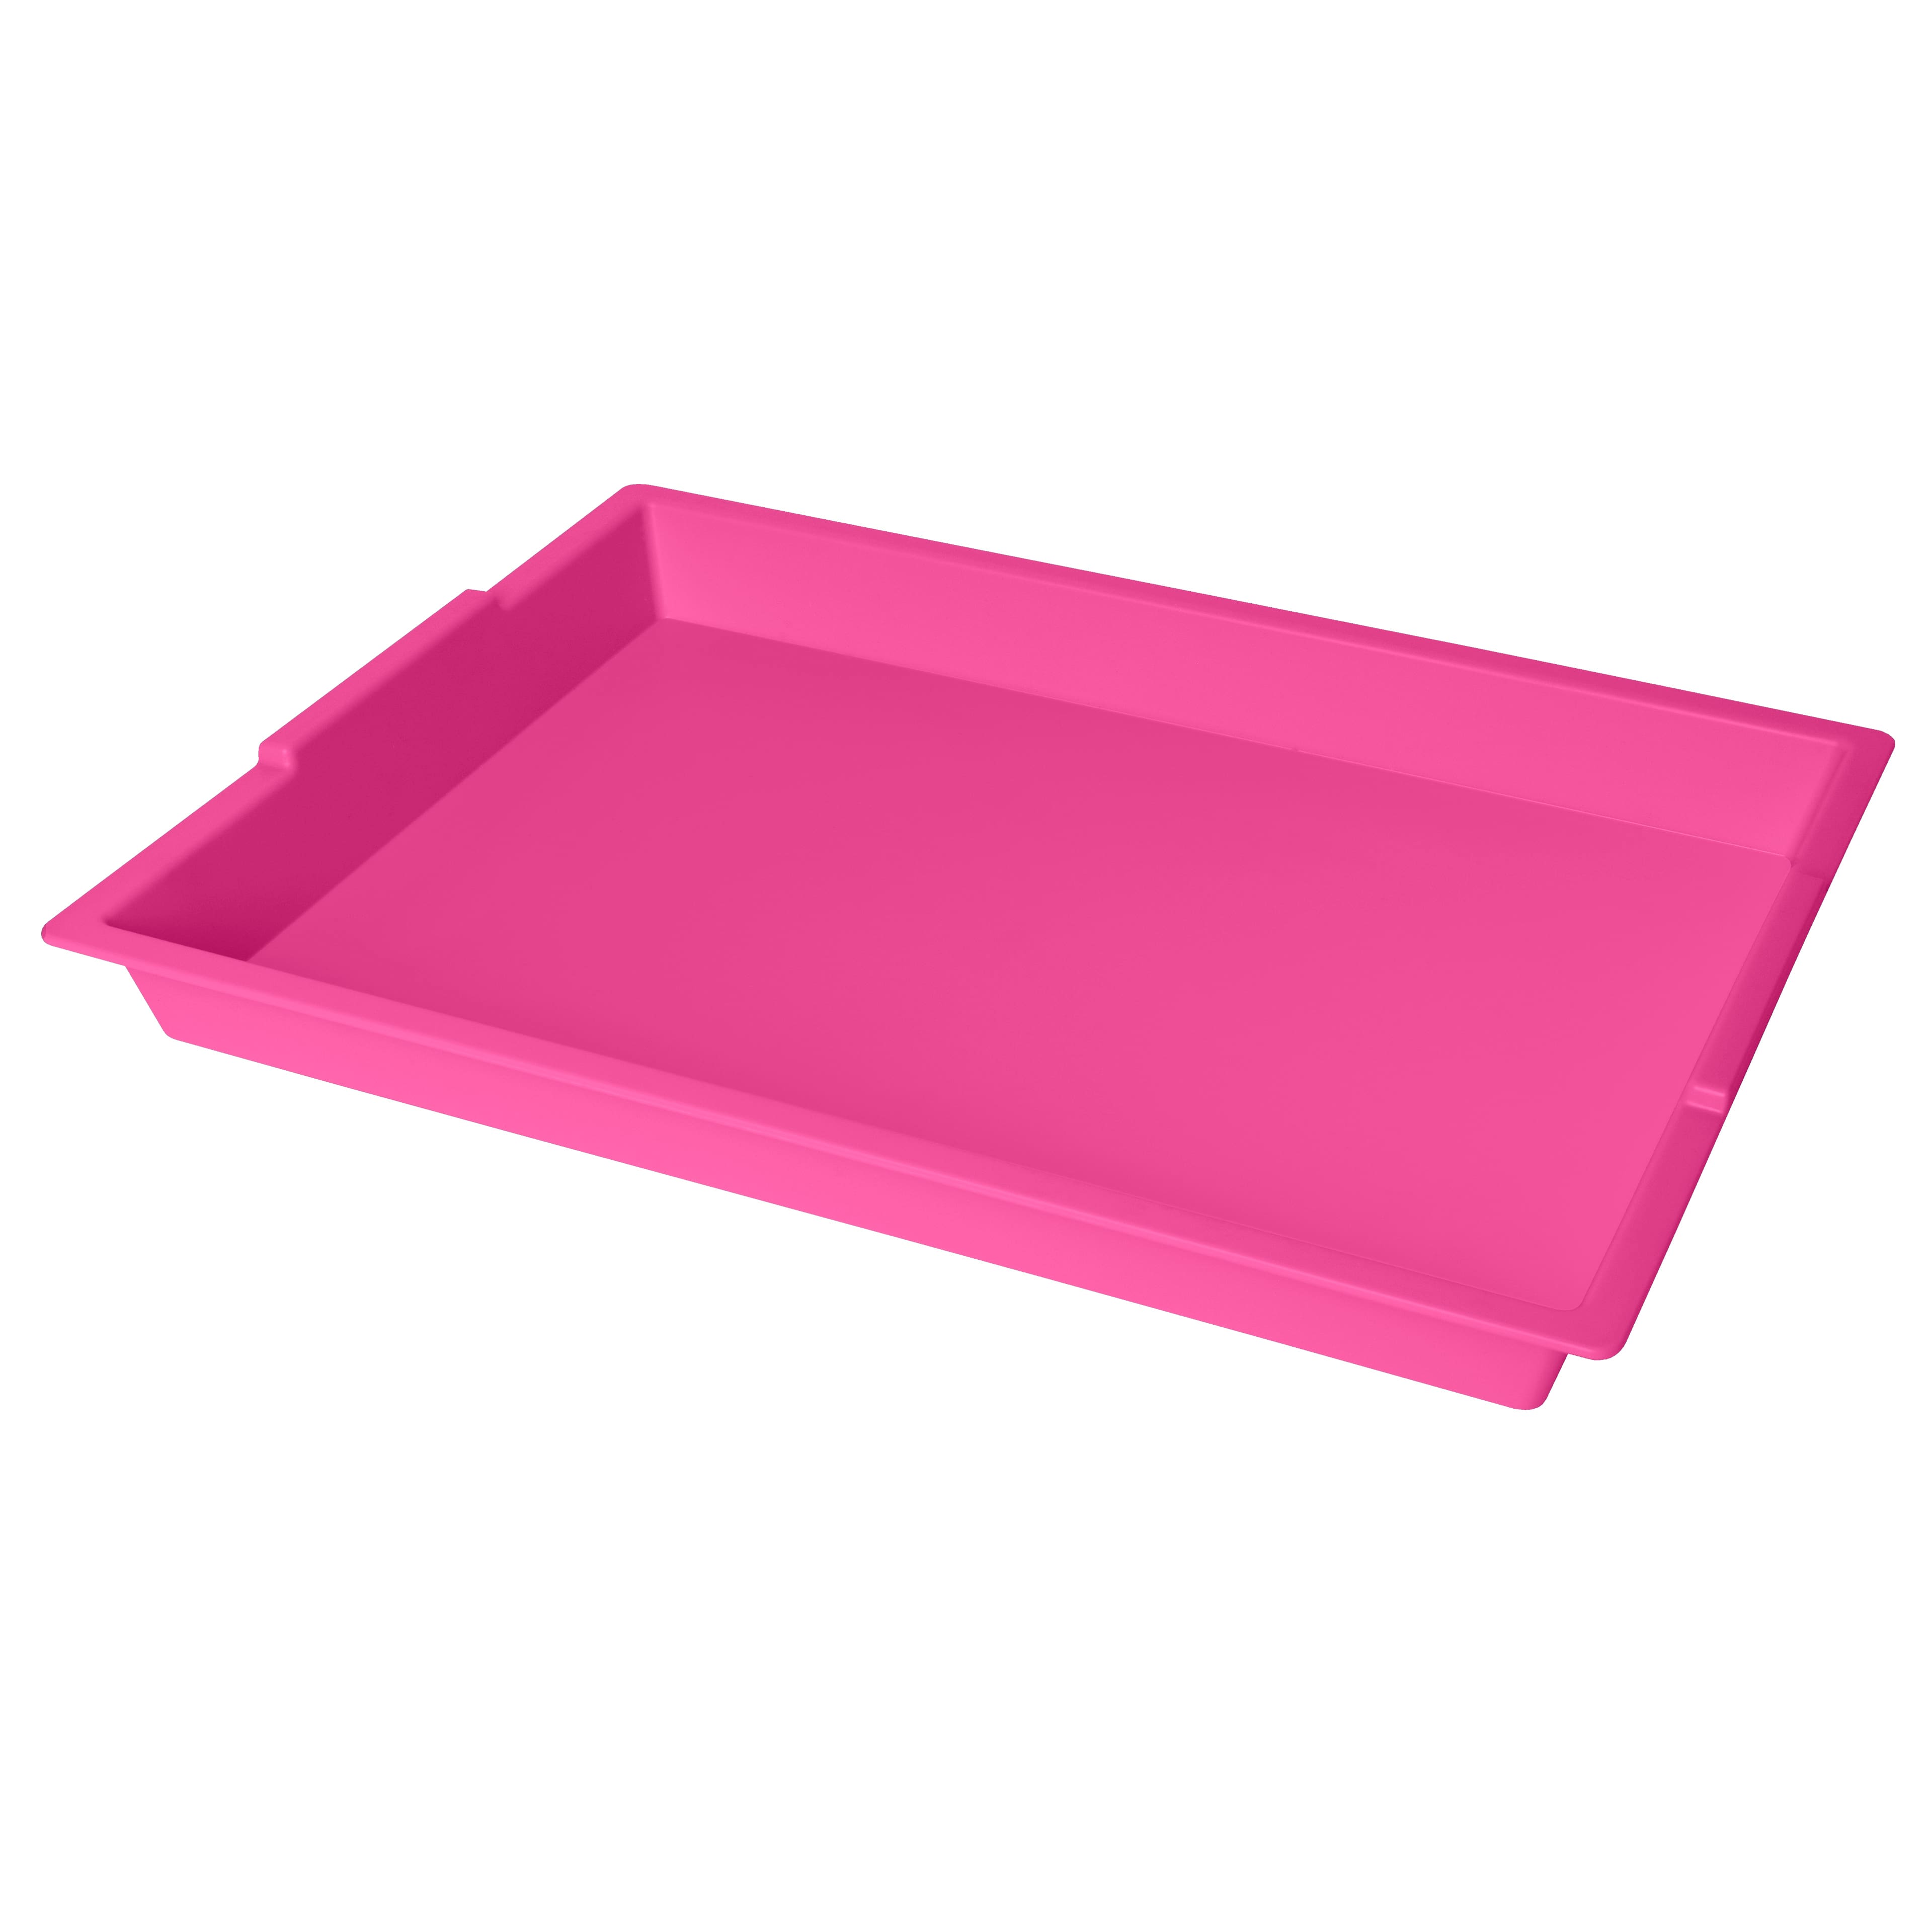 Finger Paint Tray by Creatology in Pink | 16 x 1.75 x 12 | Michaels